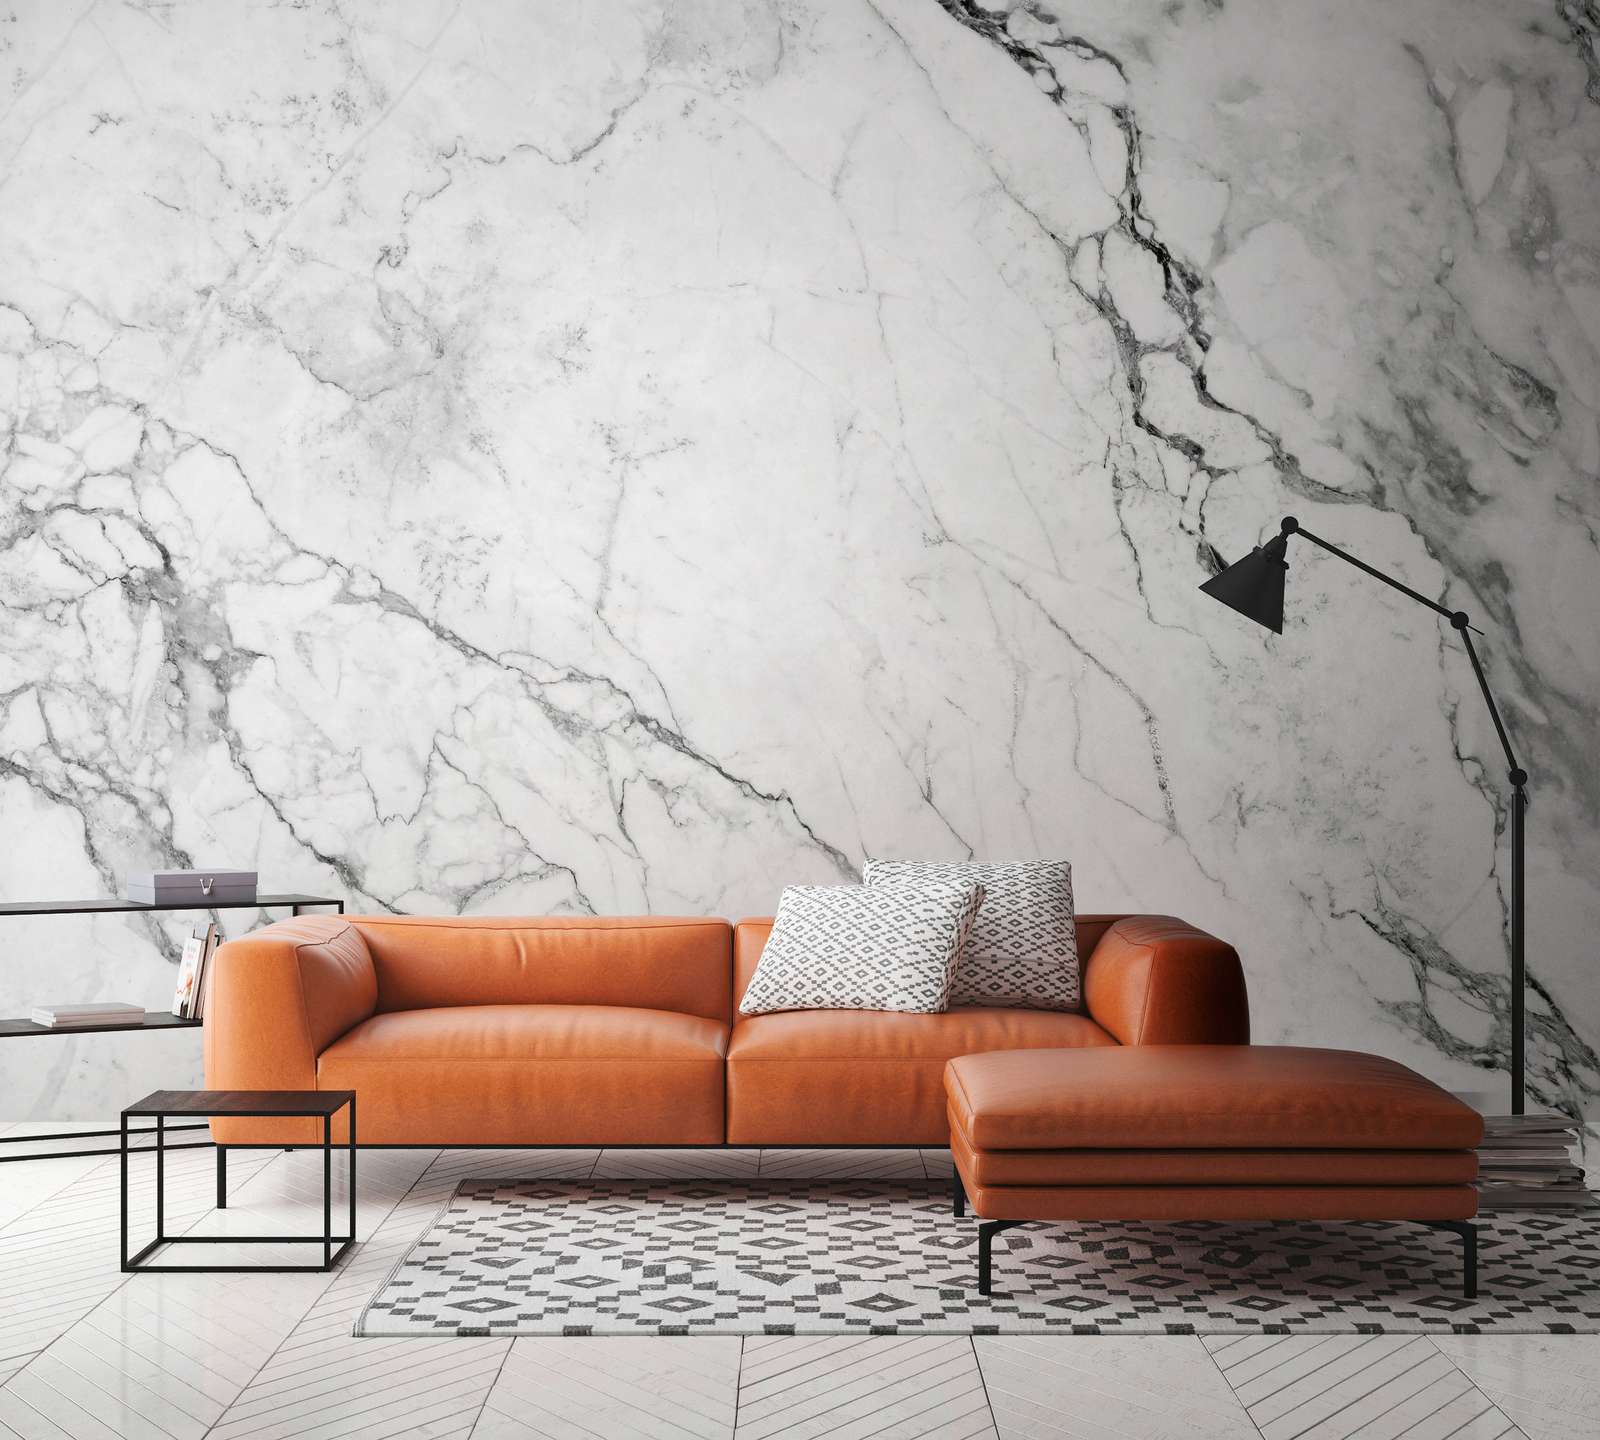             Photo wallpaper with modern marble look - grey, white
        